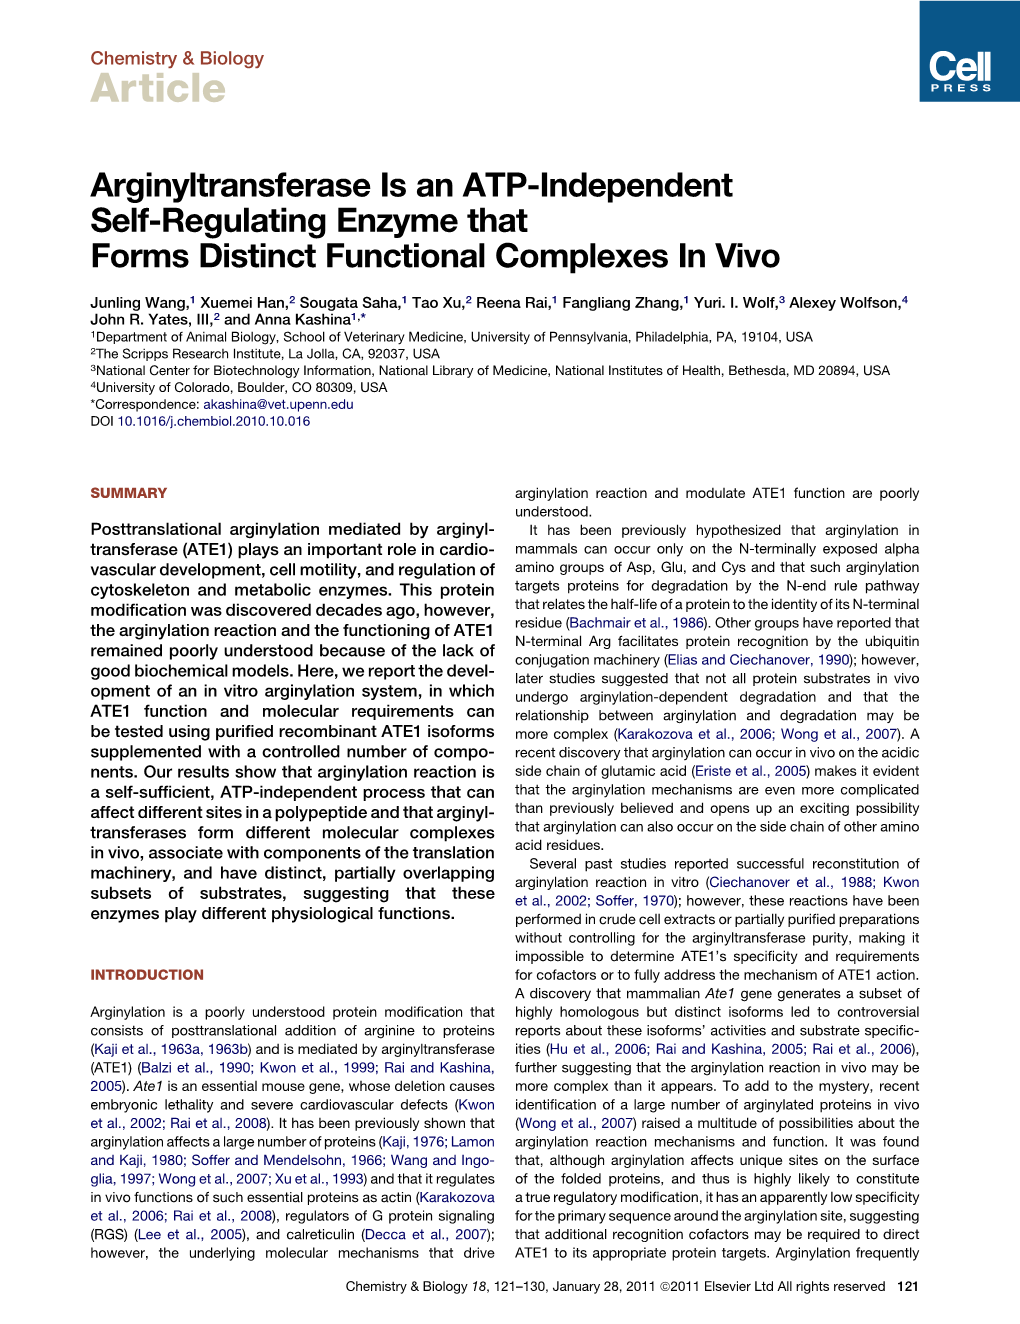 Arginyltransferase Is an ATP-Independent Self-Regulating Enzyme That Forms Distinct Functional Complexes in Vivo